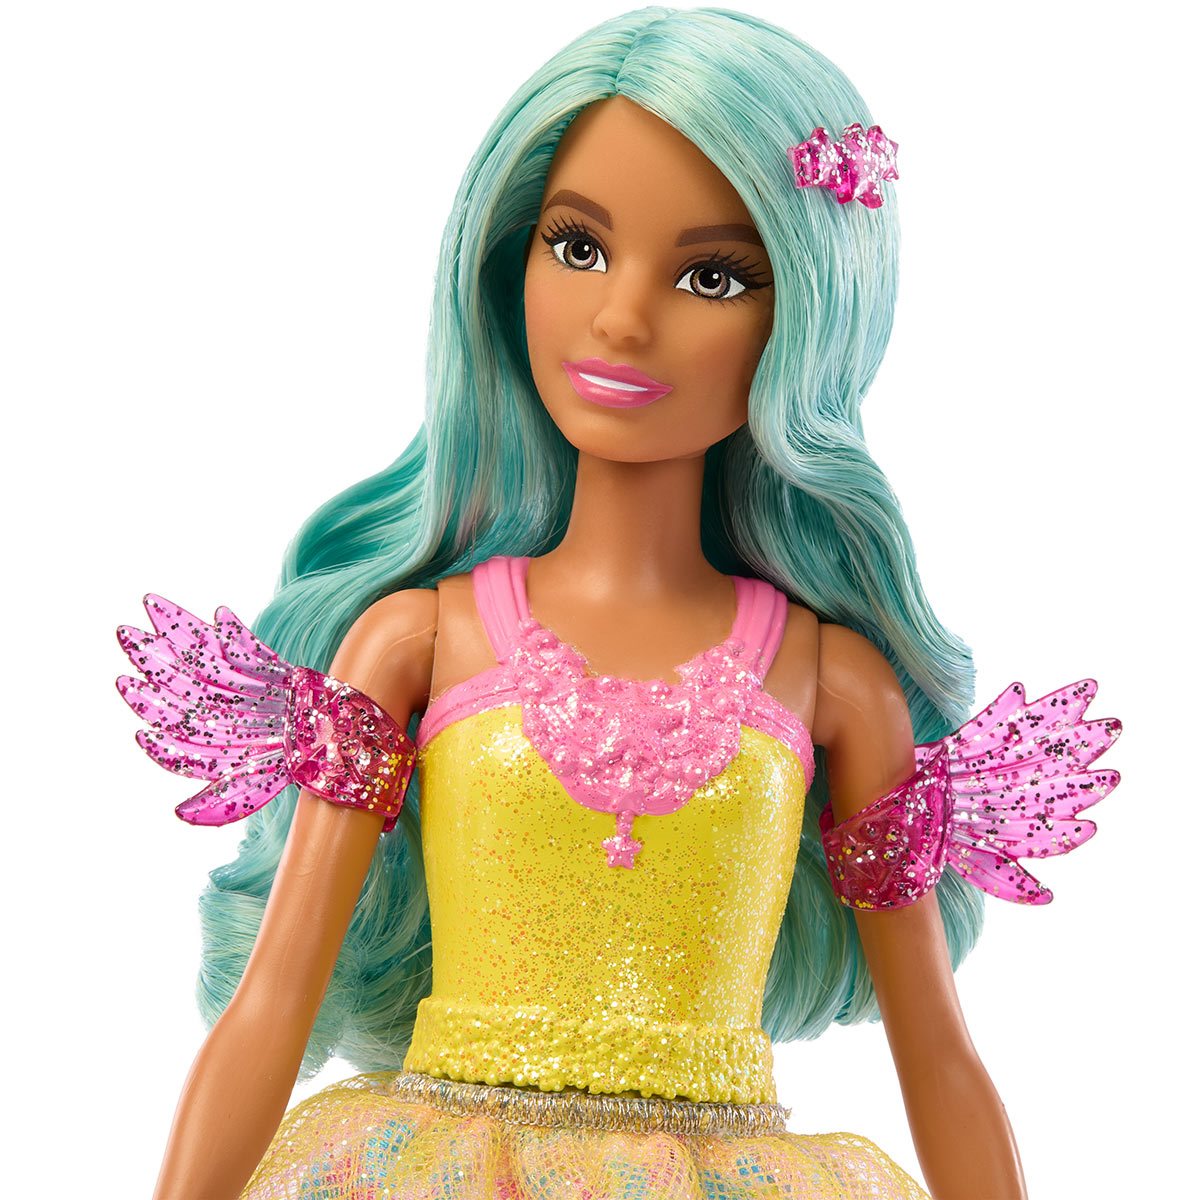 Barbie A Touch of Magic color change mermaids dolls 